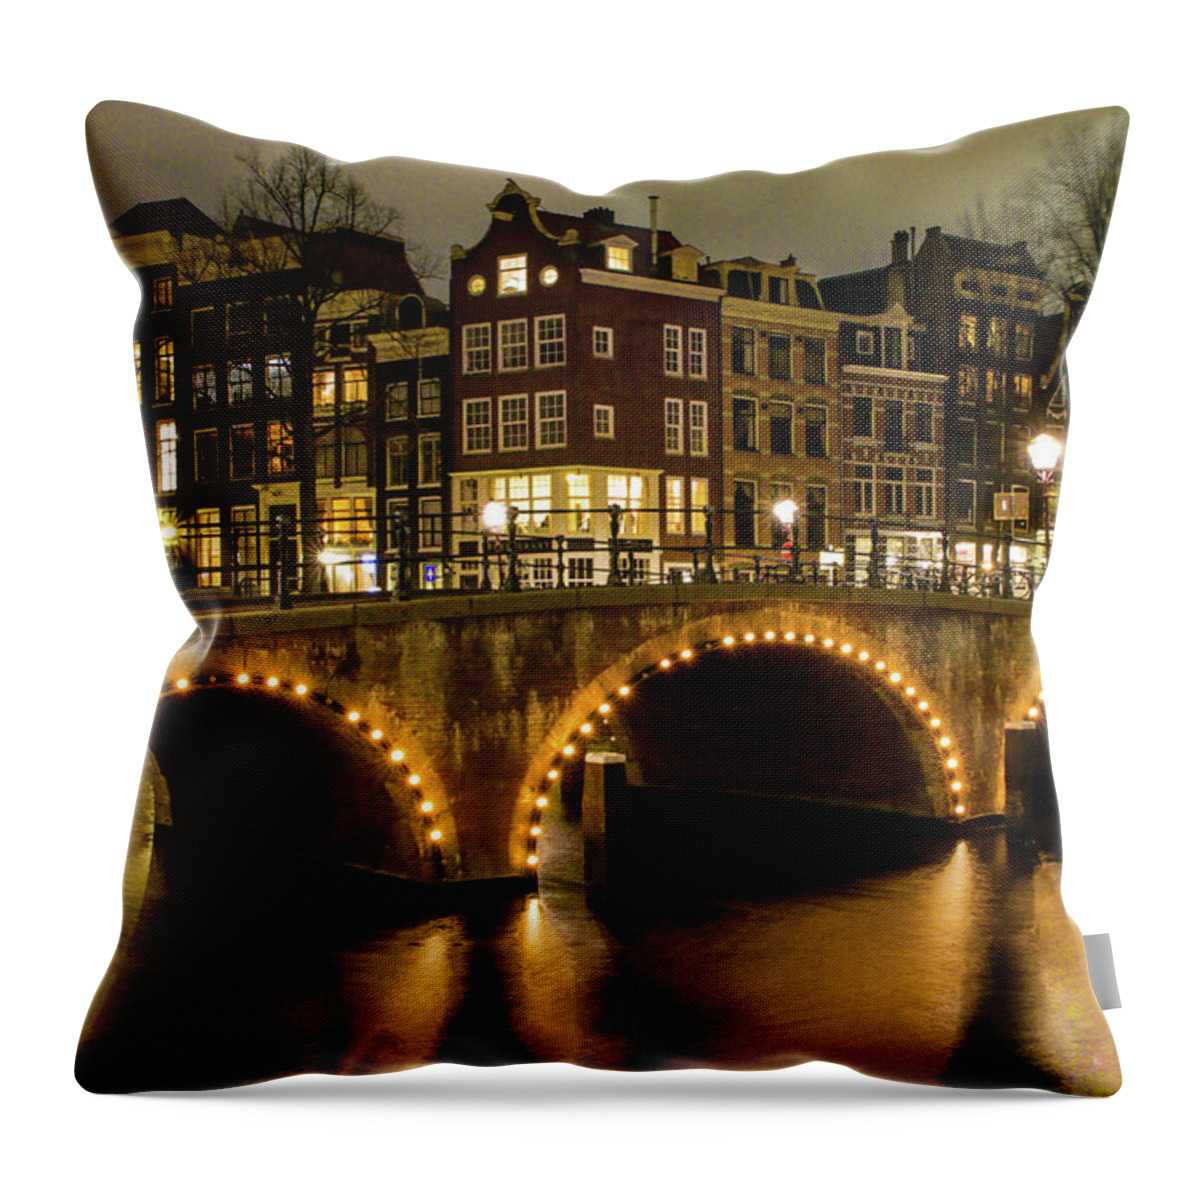 Amsterdam Canal Throw Pillow featuring the photograph Old Amsterdam Canals Evening by Norma Brandsberg